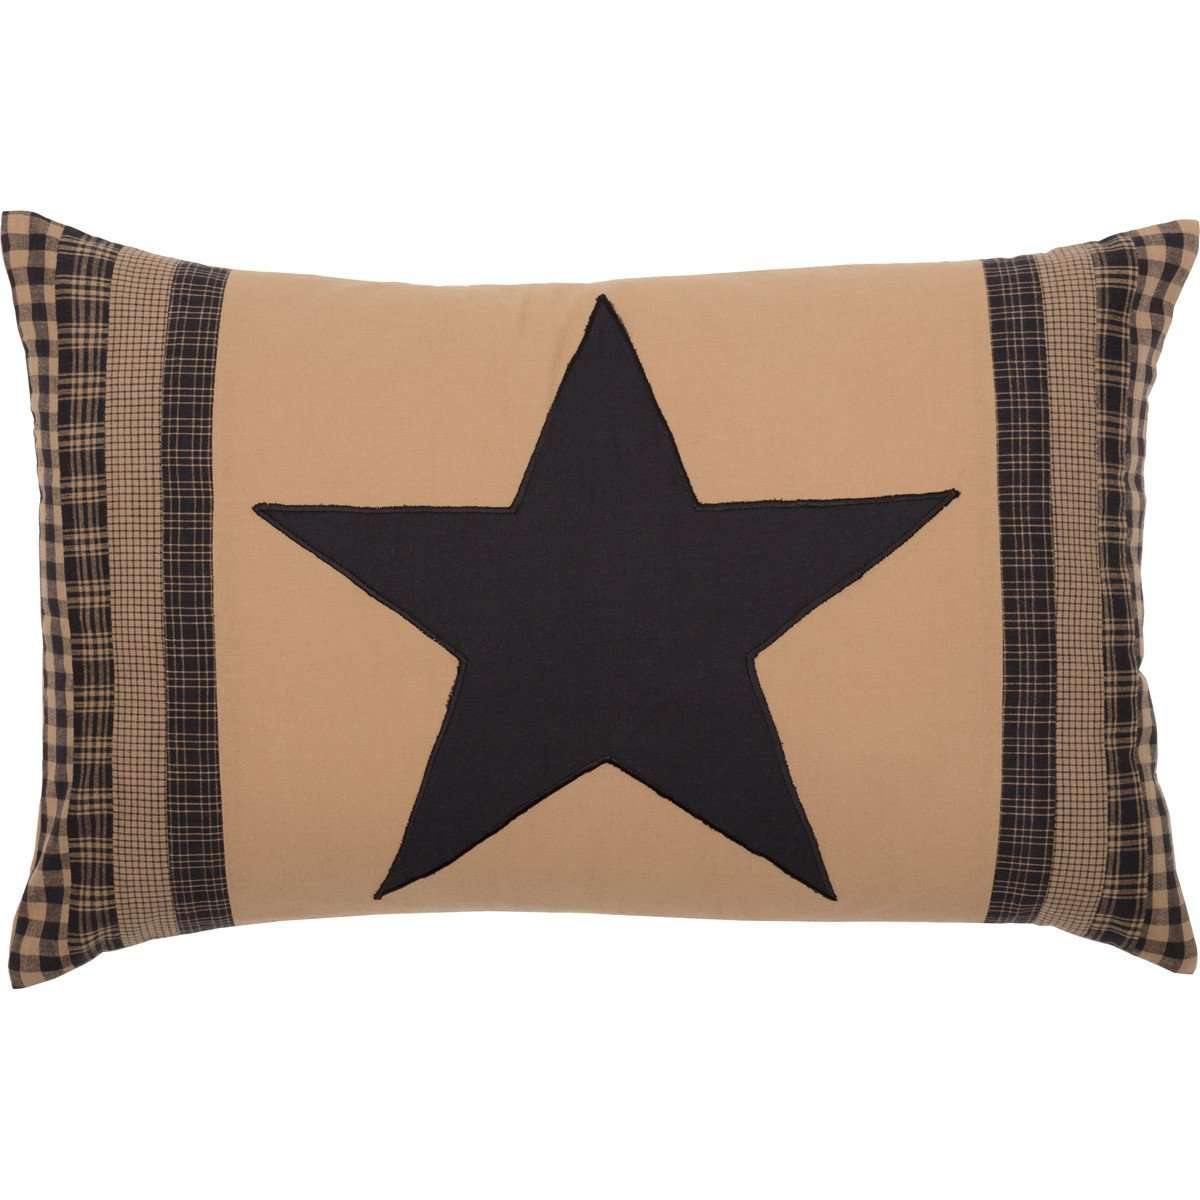 Black Check Star Patch Pillow 14x22 VHC Brands front